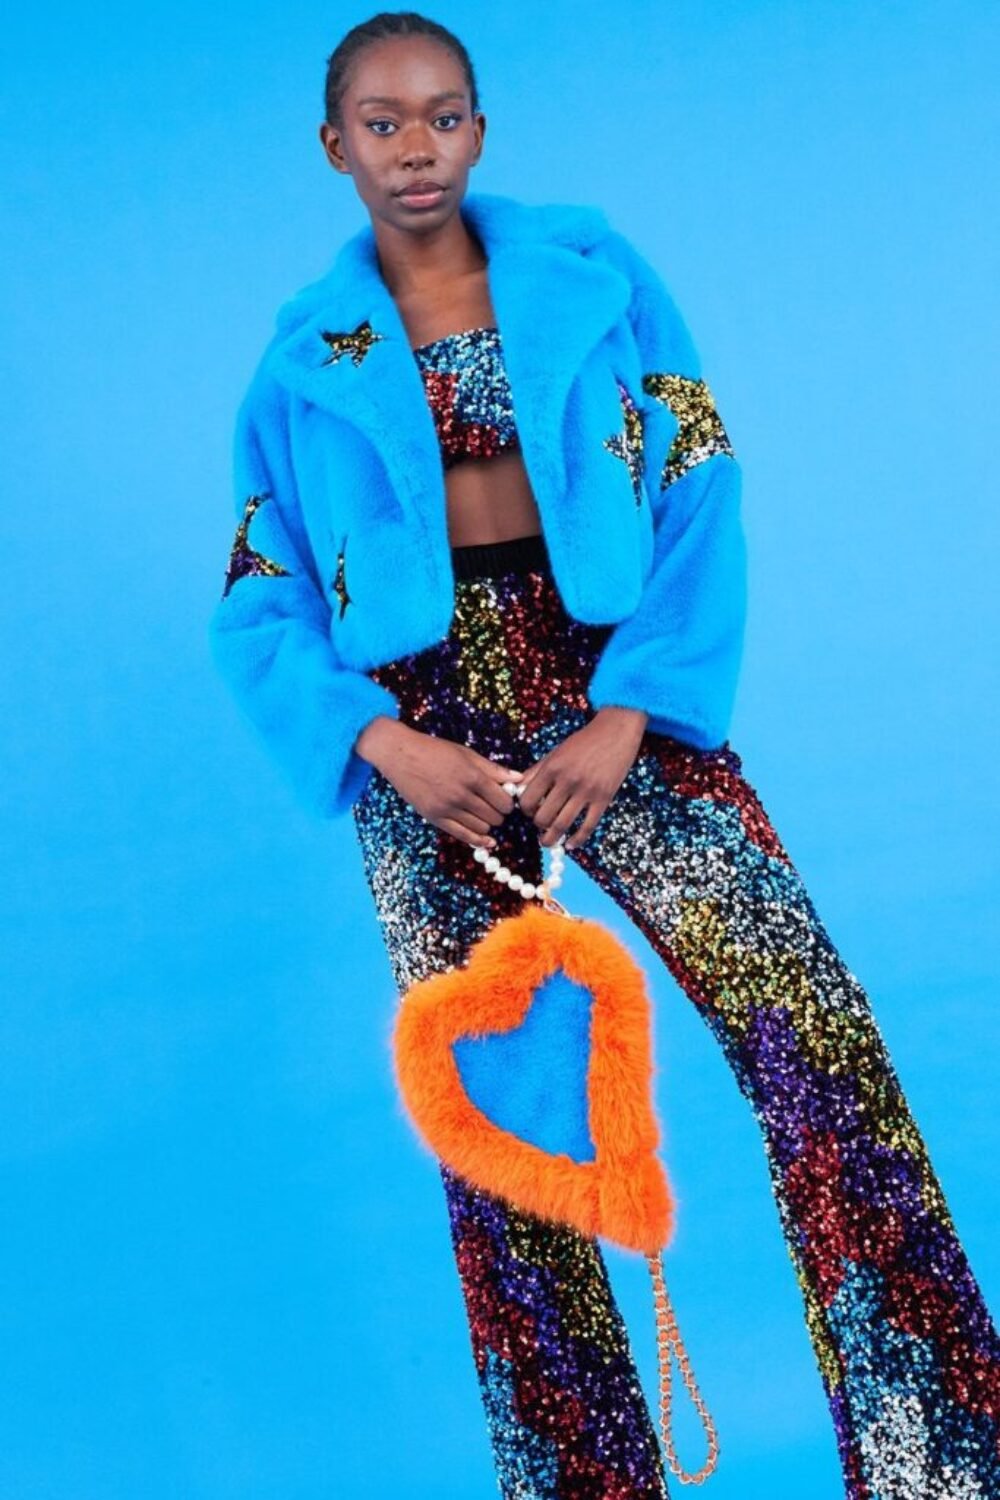 Shop Lux Blue Bamboo Faux Fur Sequins Star Jacket and women's luxury and designer clothes at www.lux-apparel.co.uk